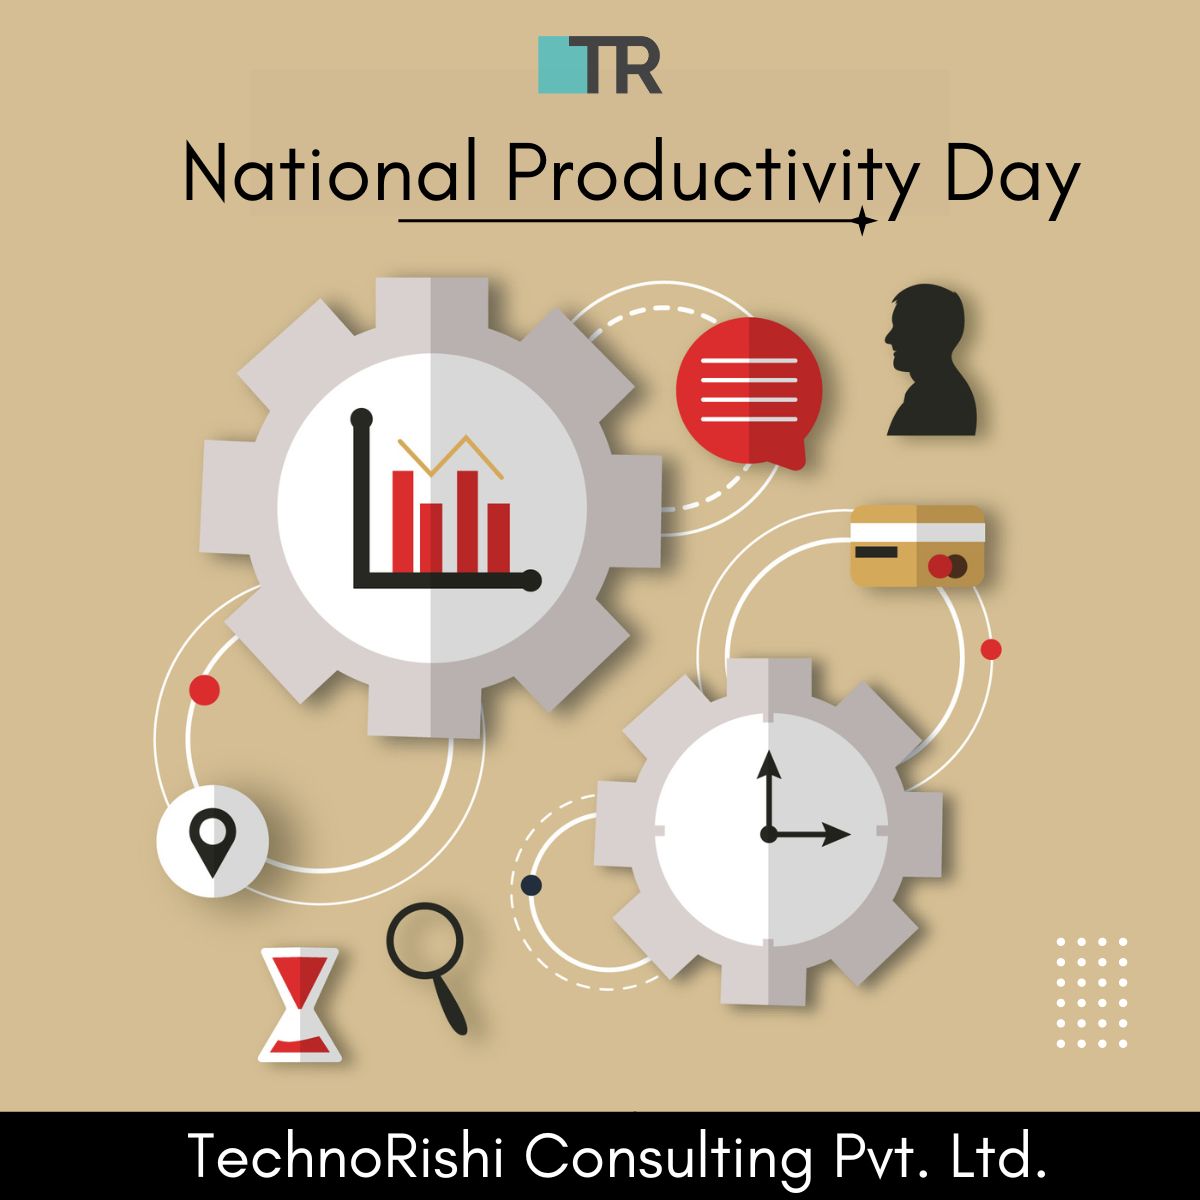 ⏰ Harness the power of efficiency on National Productivity Day. 
Let's optimize our efforts and celebrate the art of productivity!💯

#productivity #efforts #officegoals #efficiencymatters #technorishiconsulting #technorishi